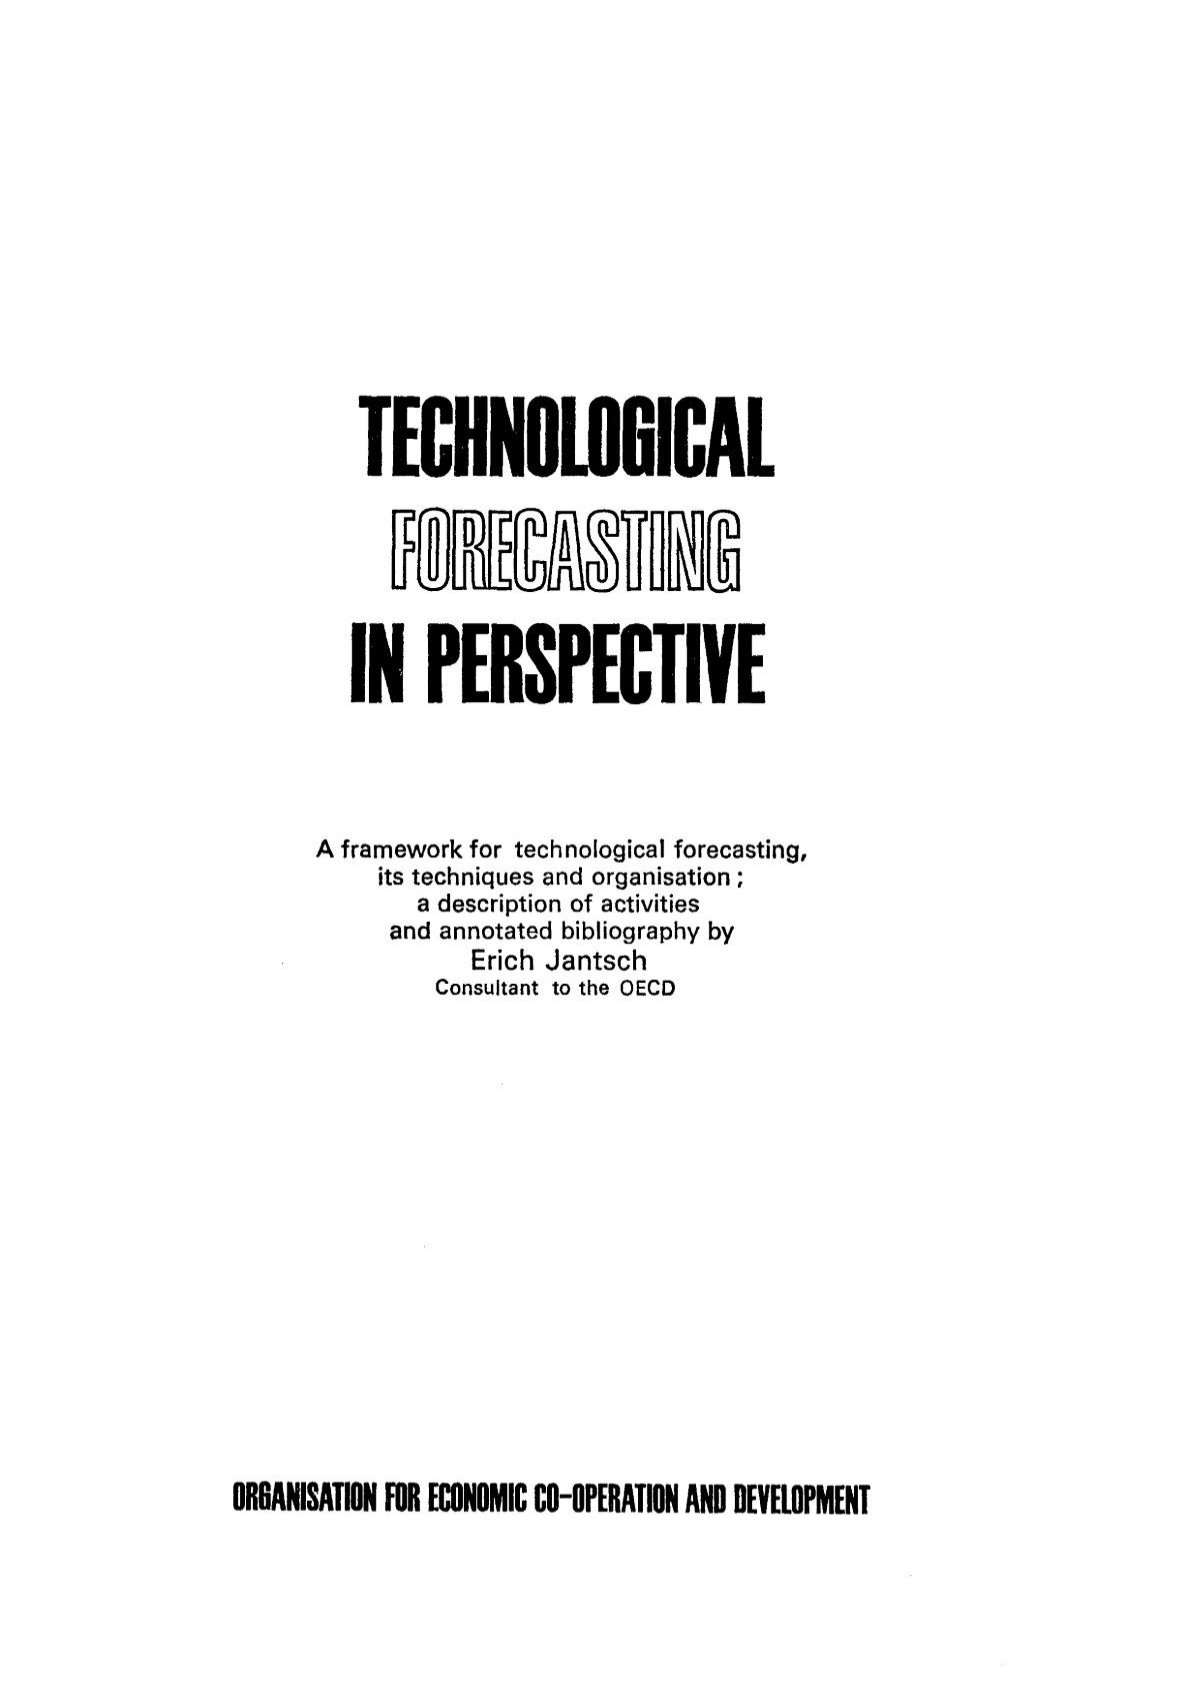 Technological forecasting in perspective - La prospective